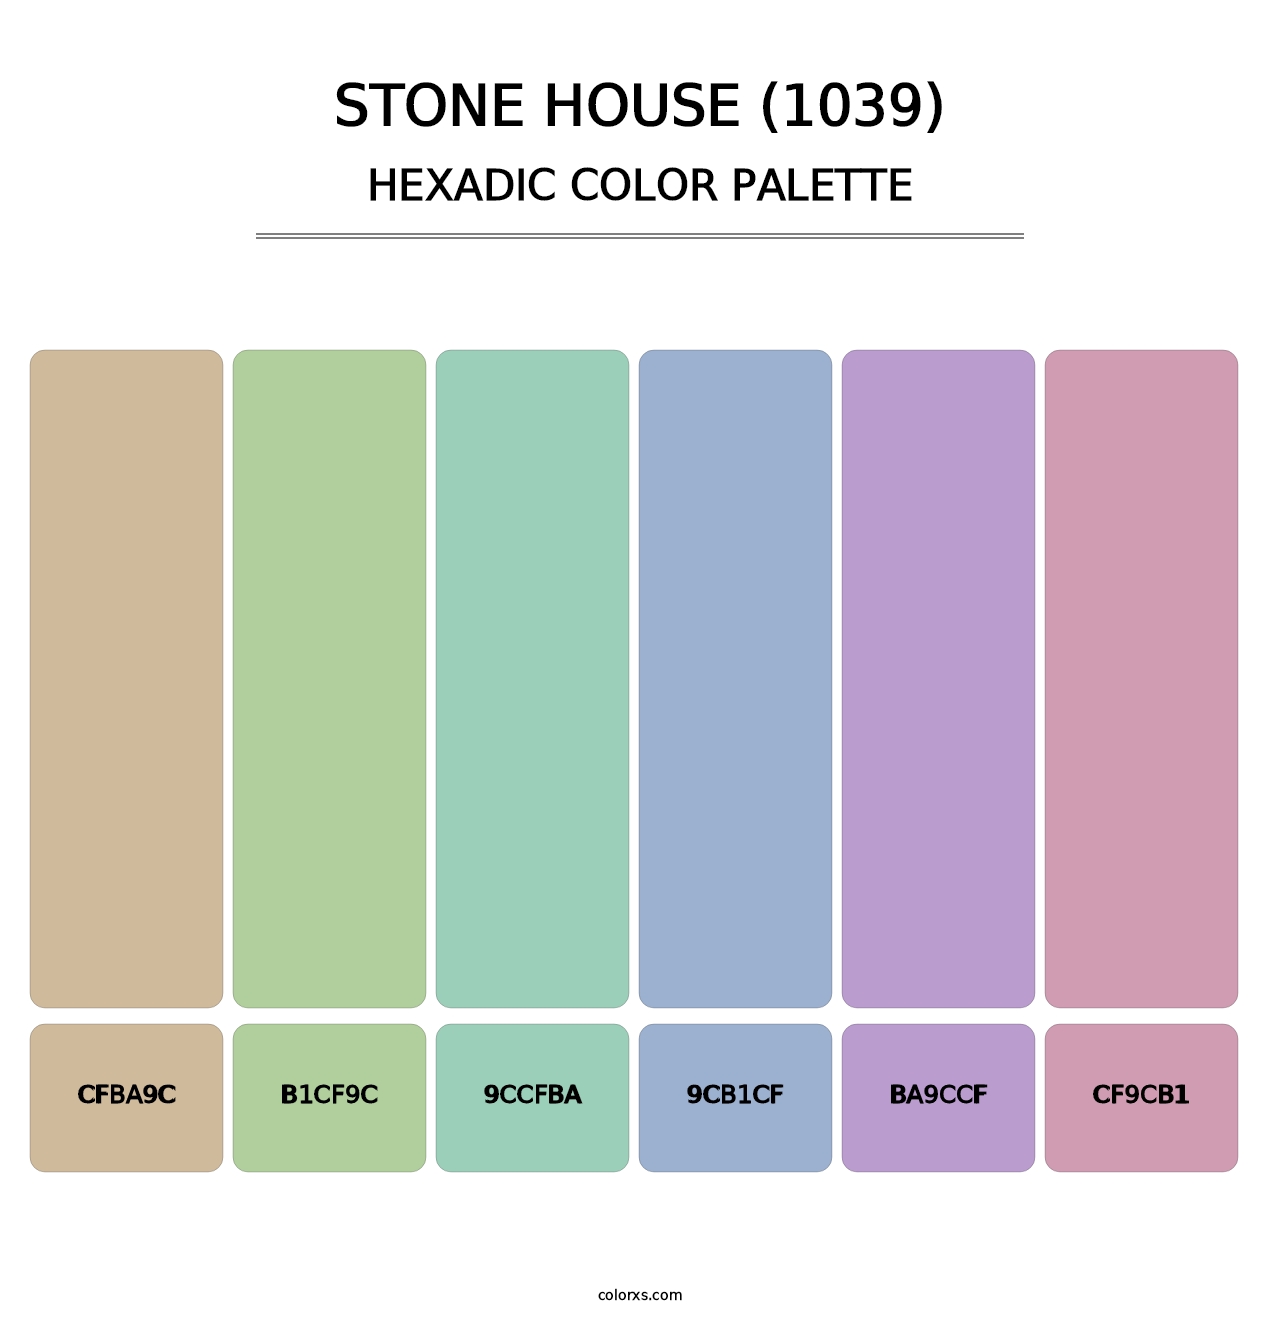 Stone House (1039) - Hexadic Color Palette